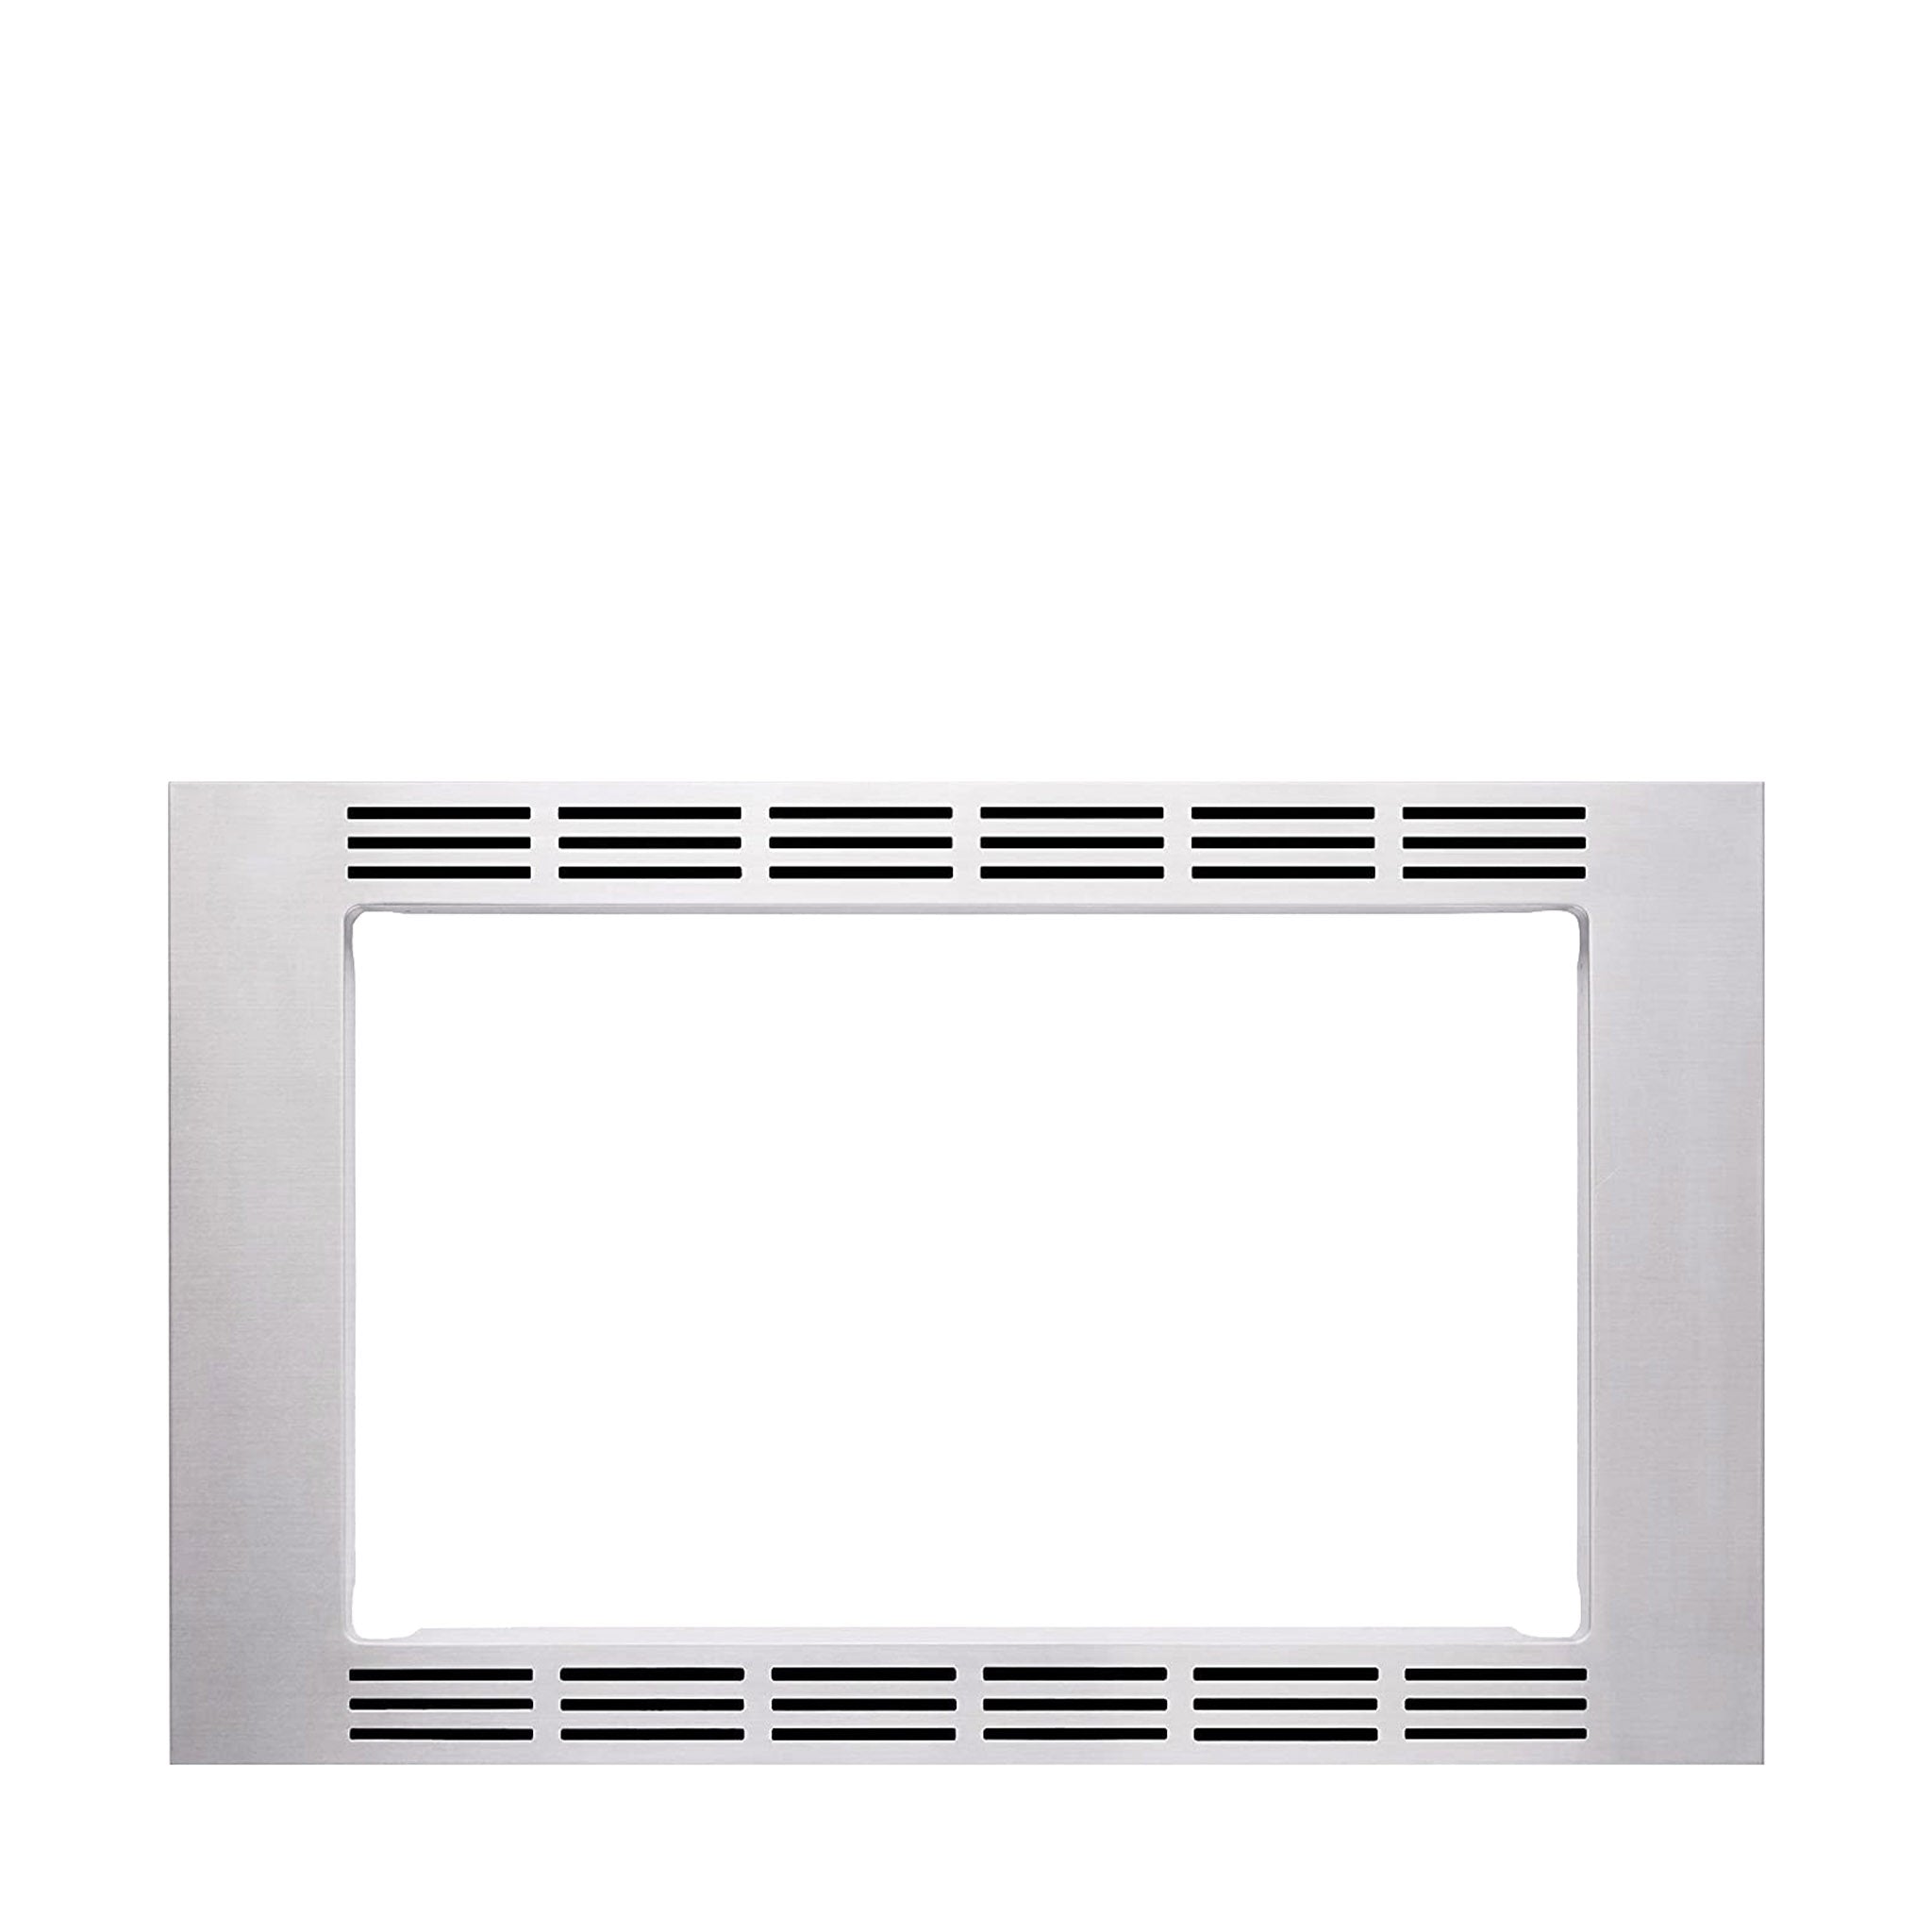 27-inch Vented Trim Kit for 1.2 cu. ft. Microwaves